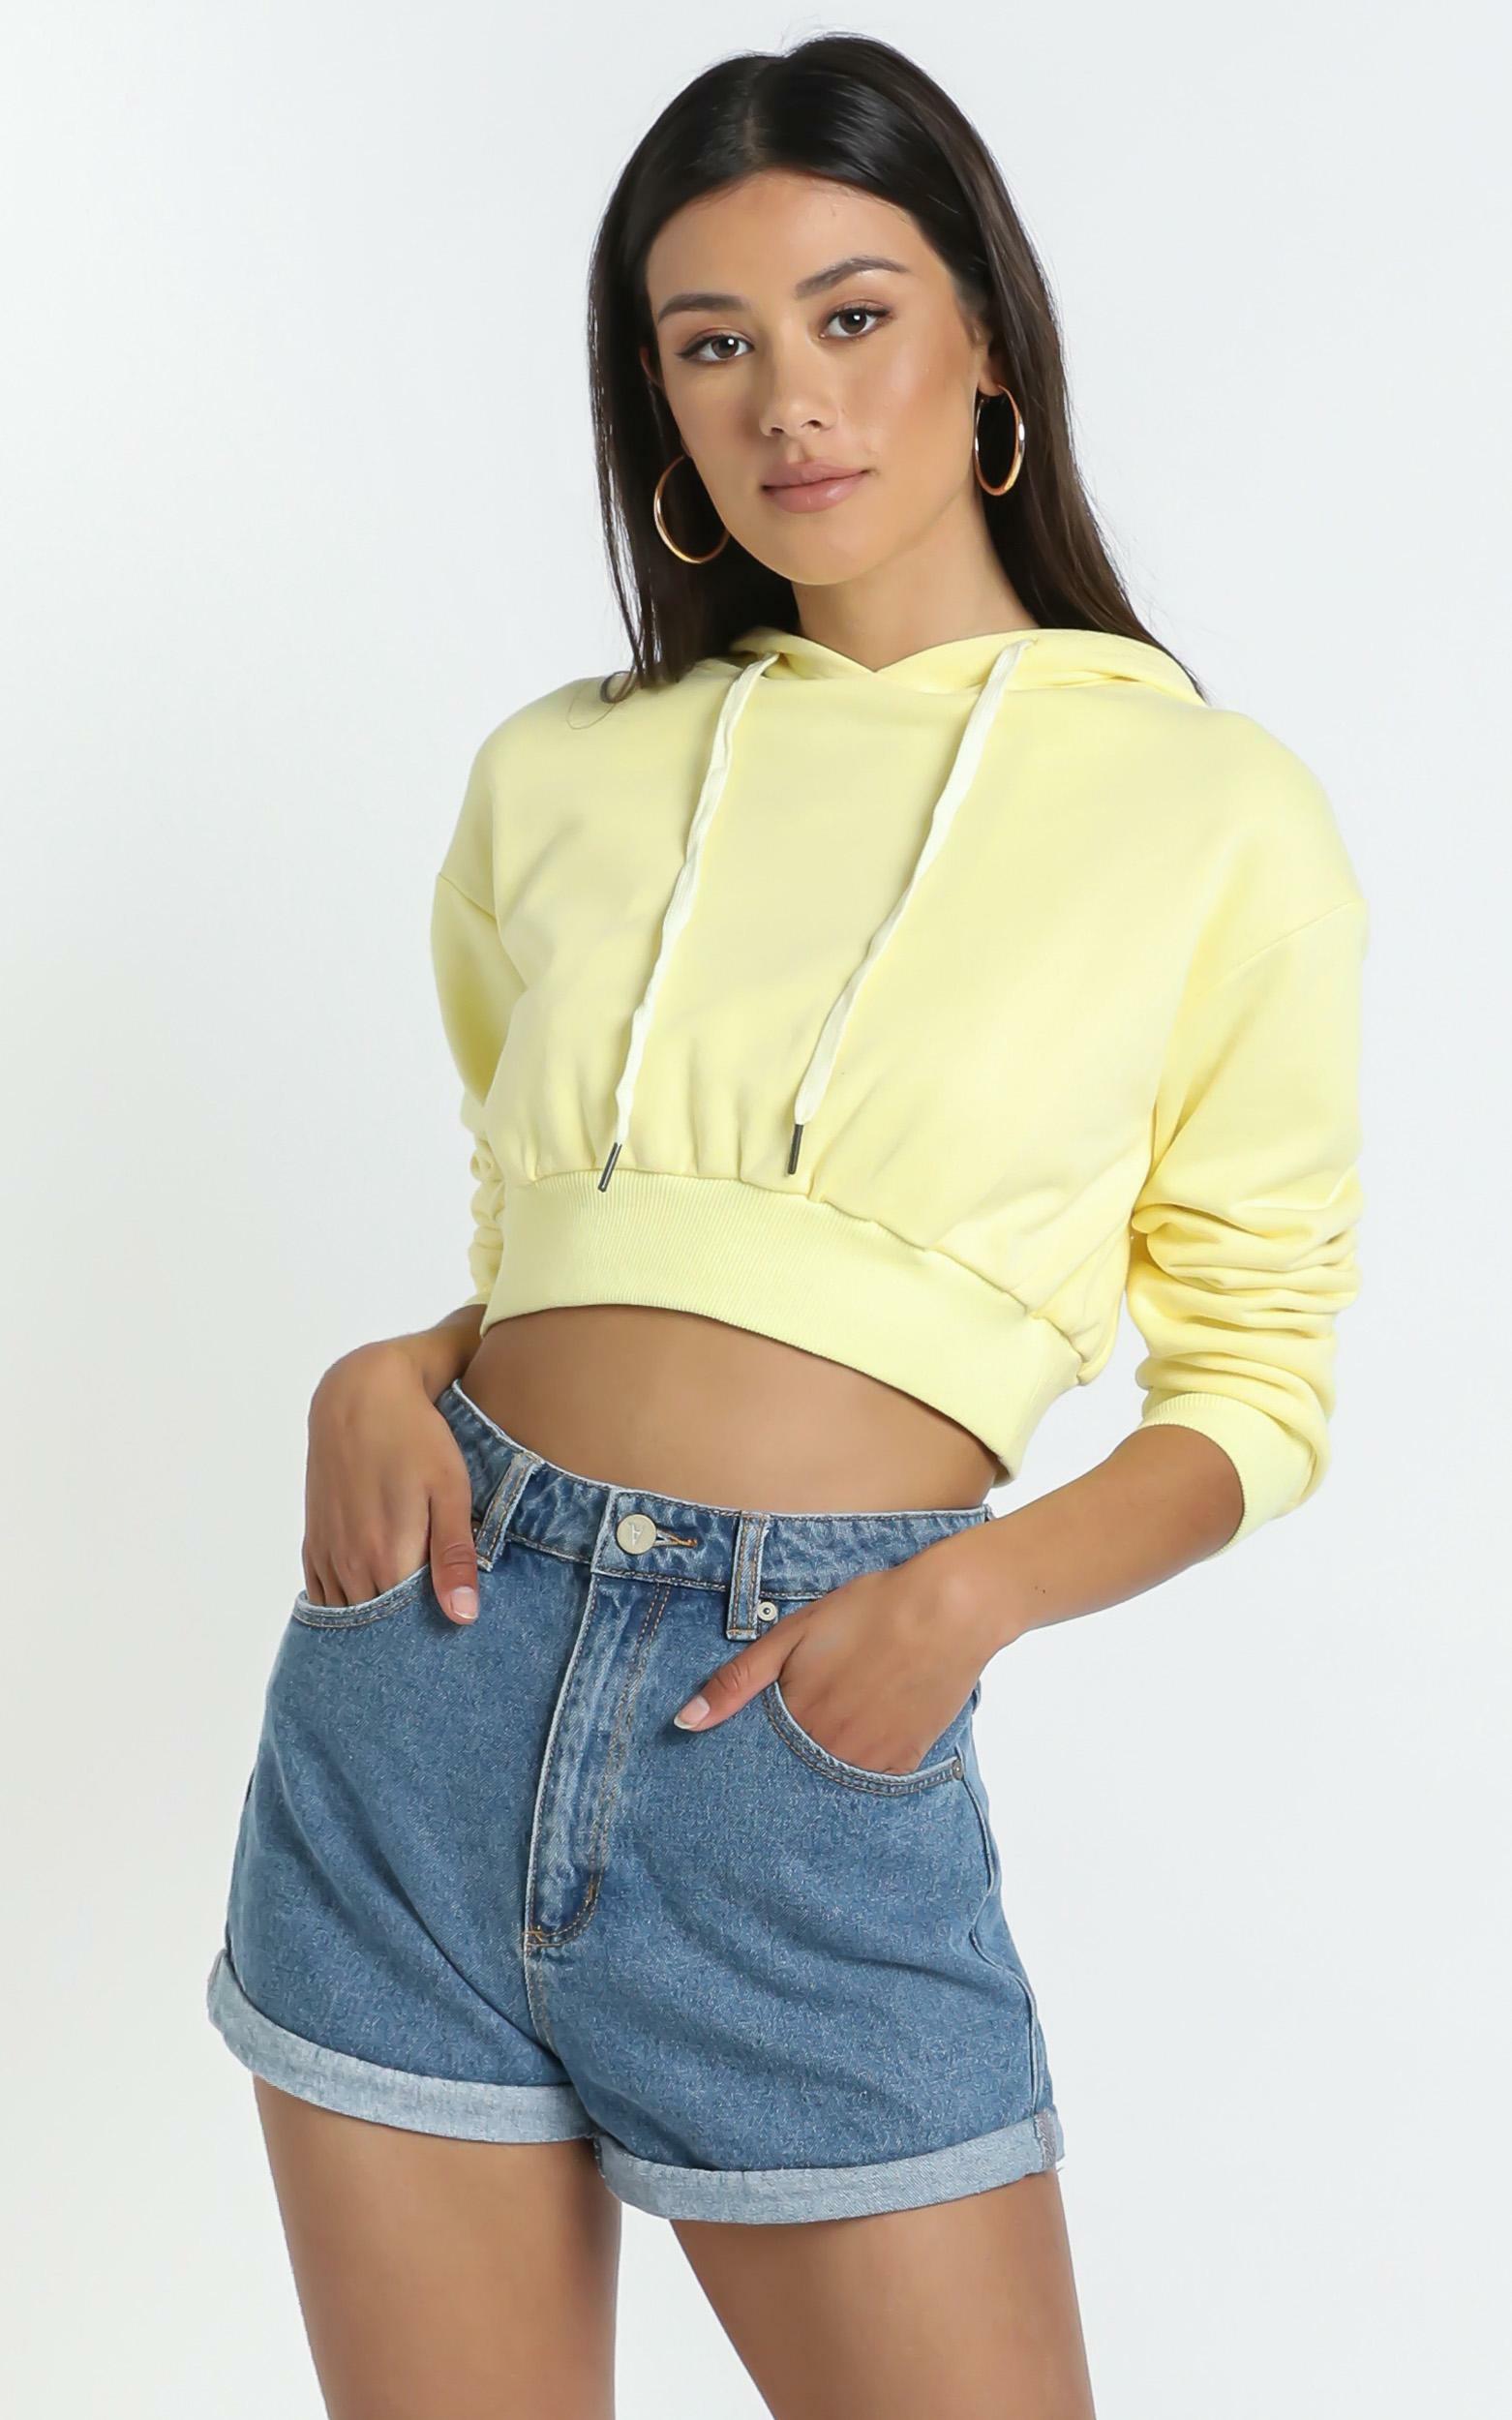 Martigues Hoodie in Yellow - 14 (XL), Yellow, hi-res image number null